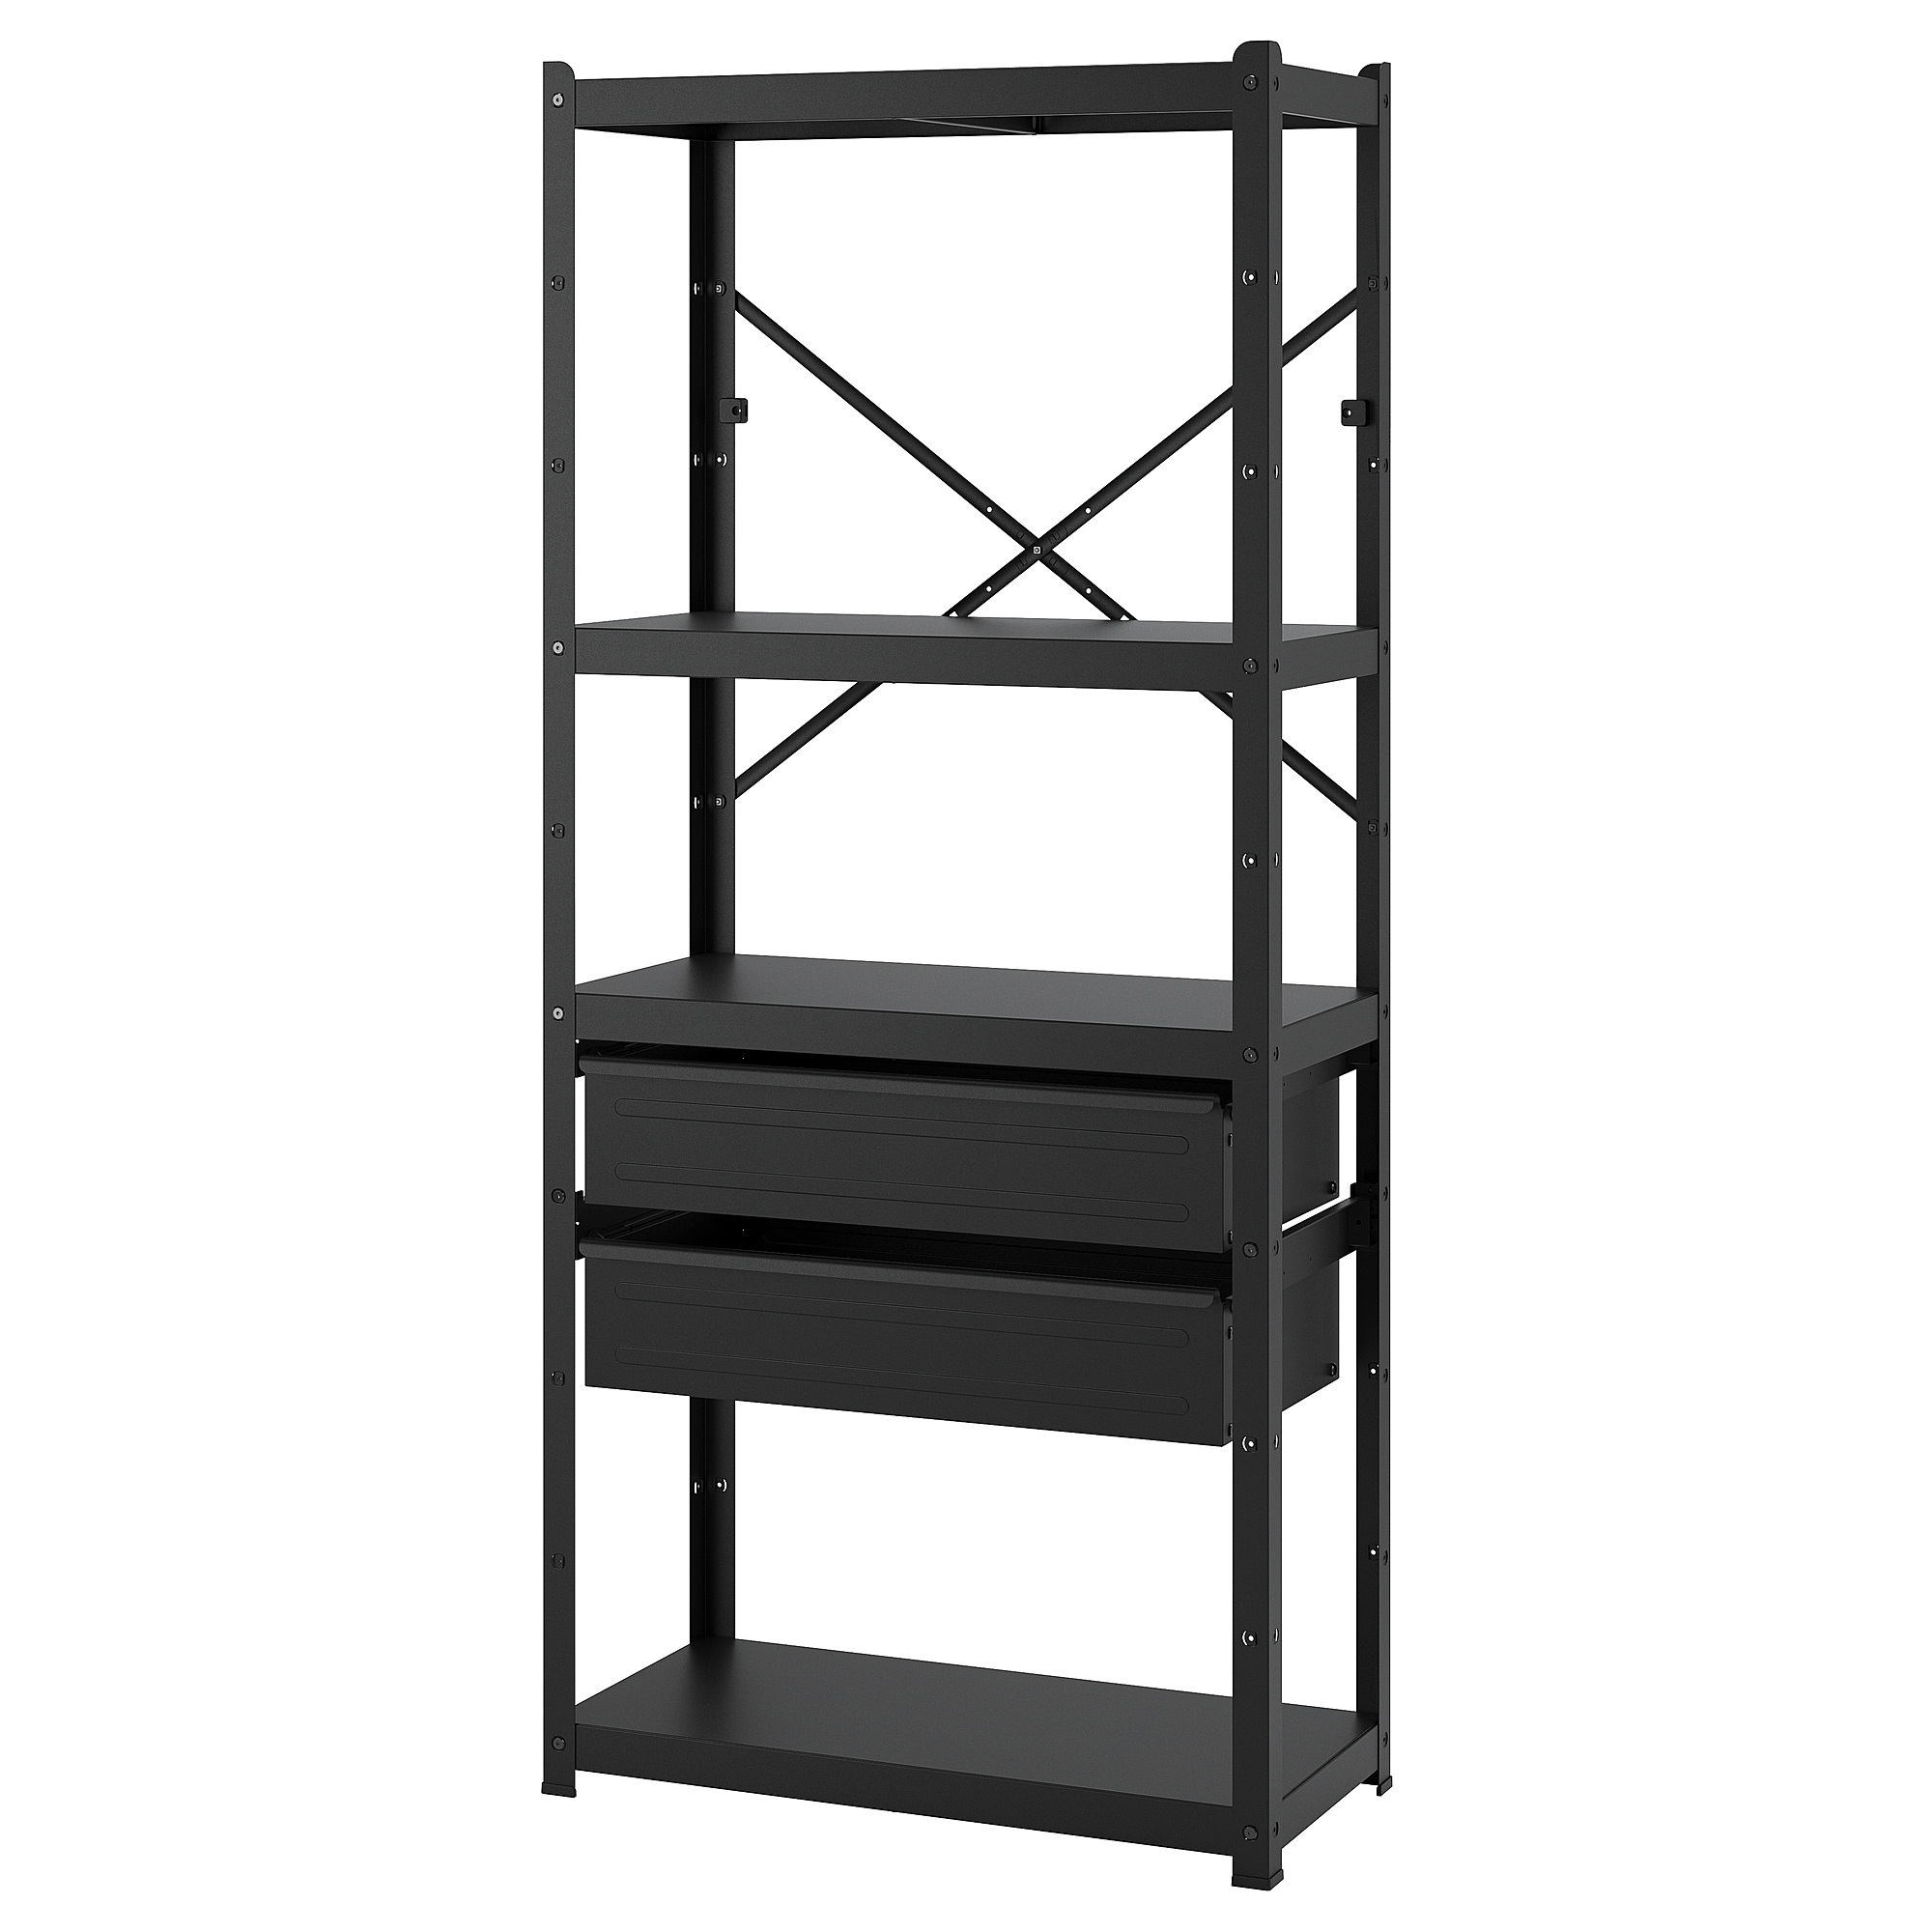 BROR shelving unit with drawers/shelves